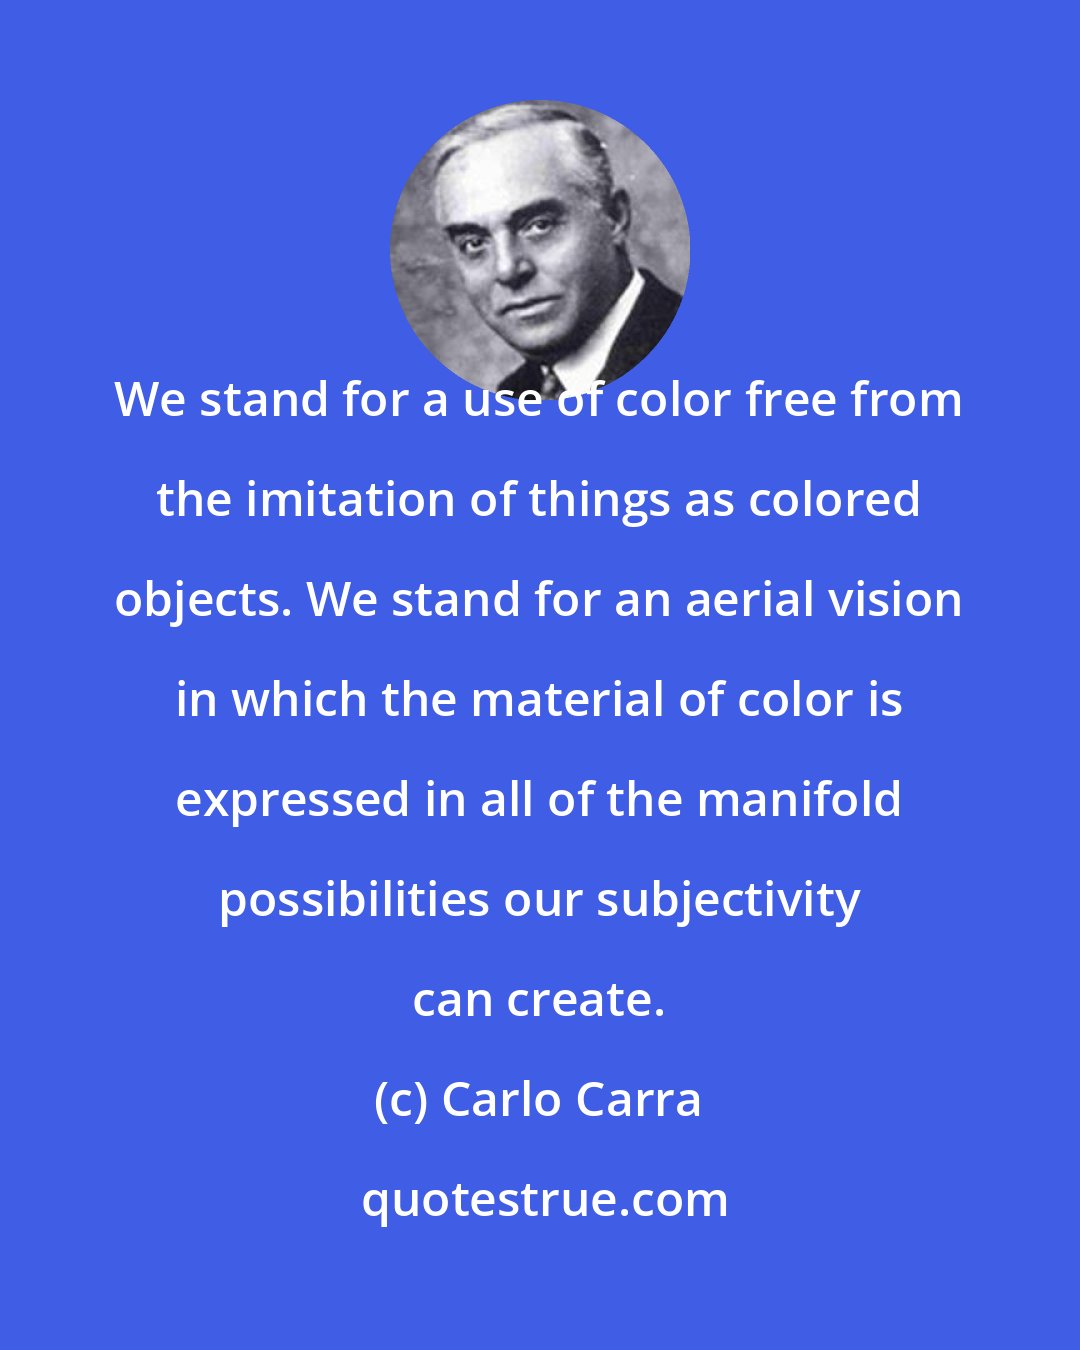 Carlo Carra: We stand for a use of color free from the imitation of things as colored objects. We stand for an aerial vision in which the material of color is expressed in all of the manifold possibilities our subjectivity can create.